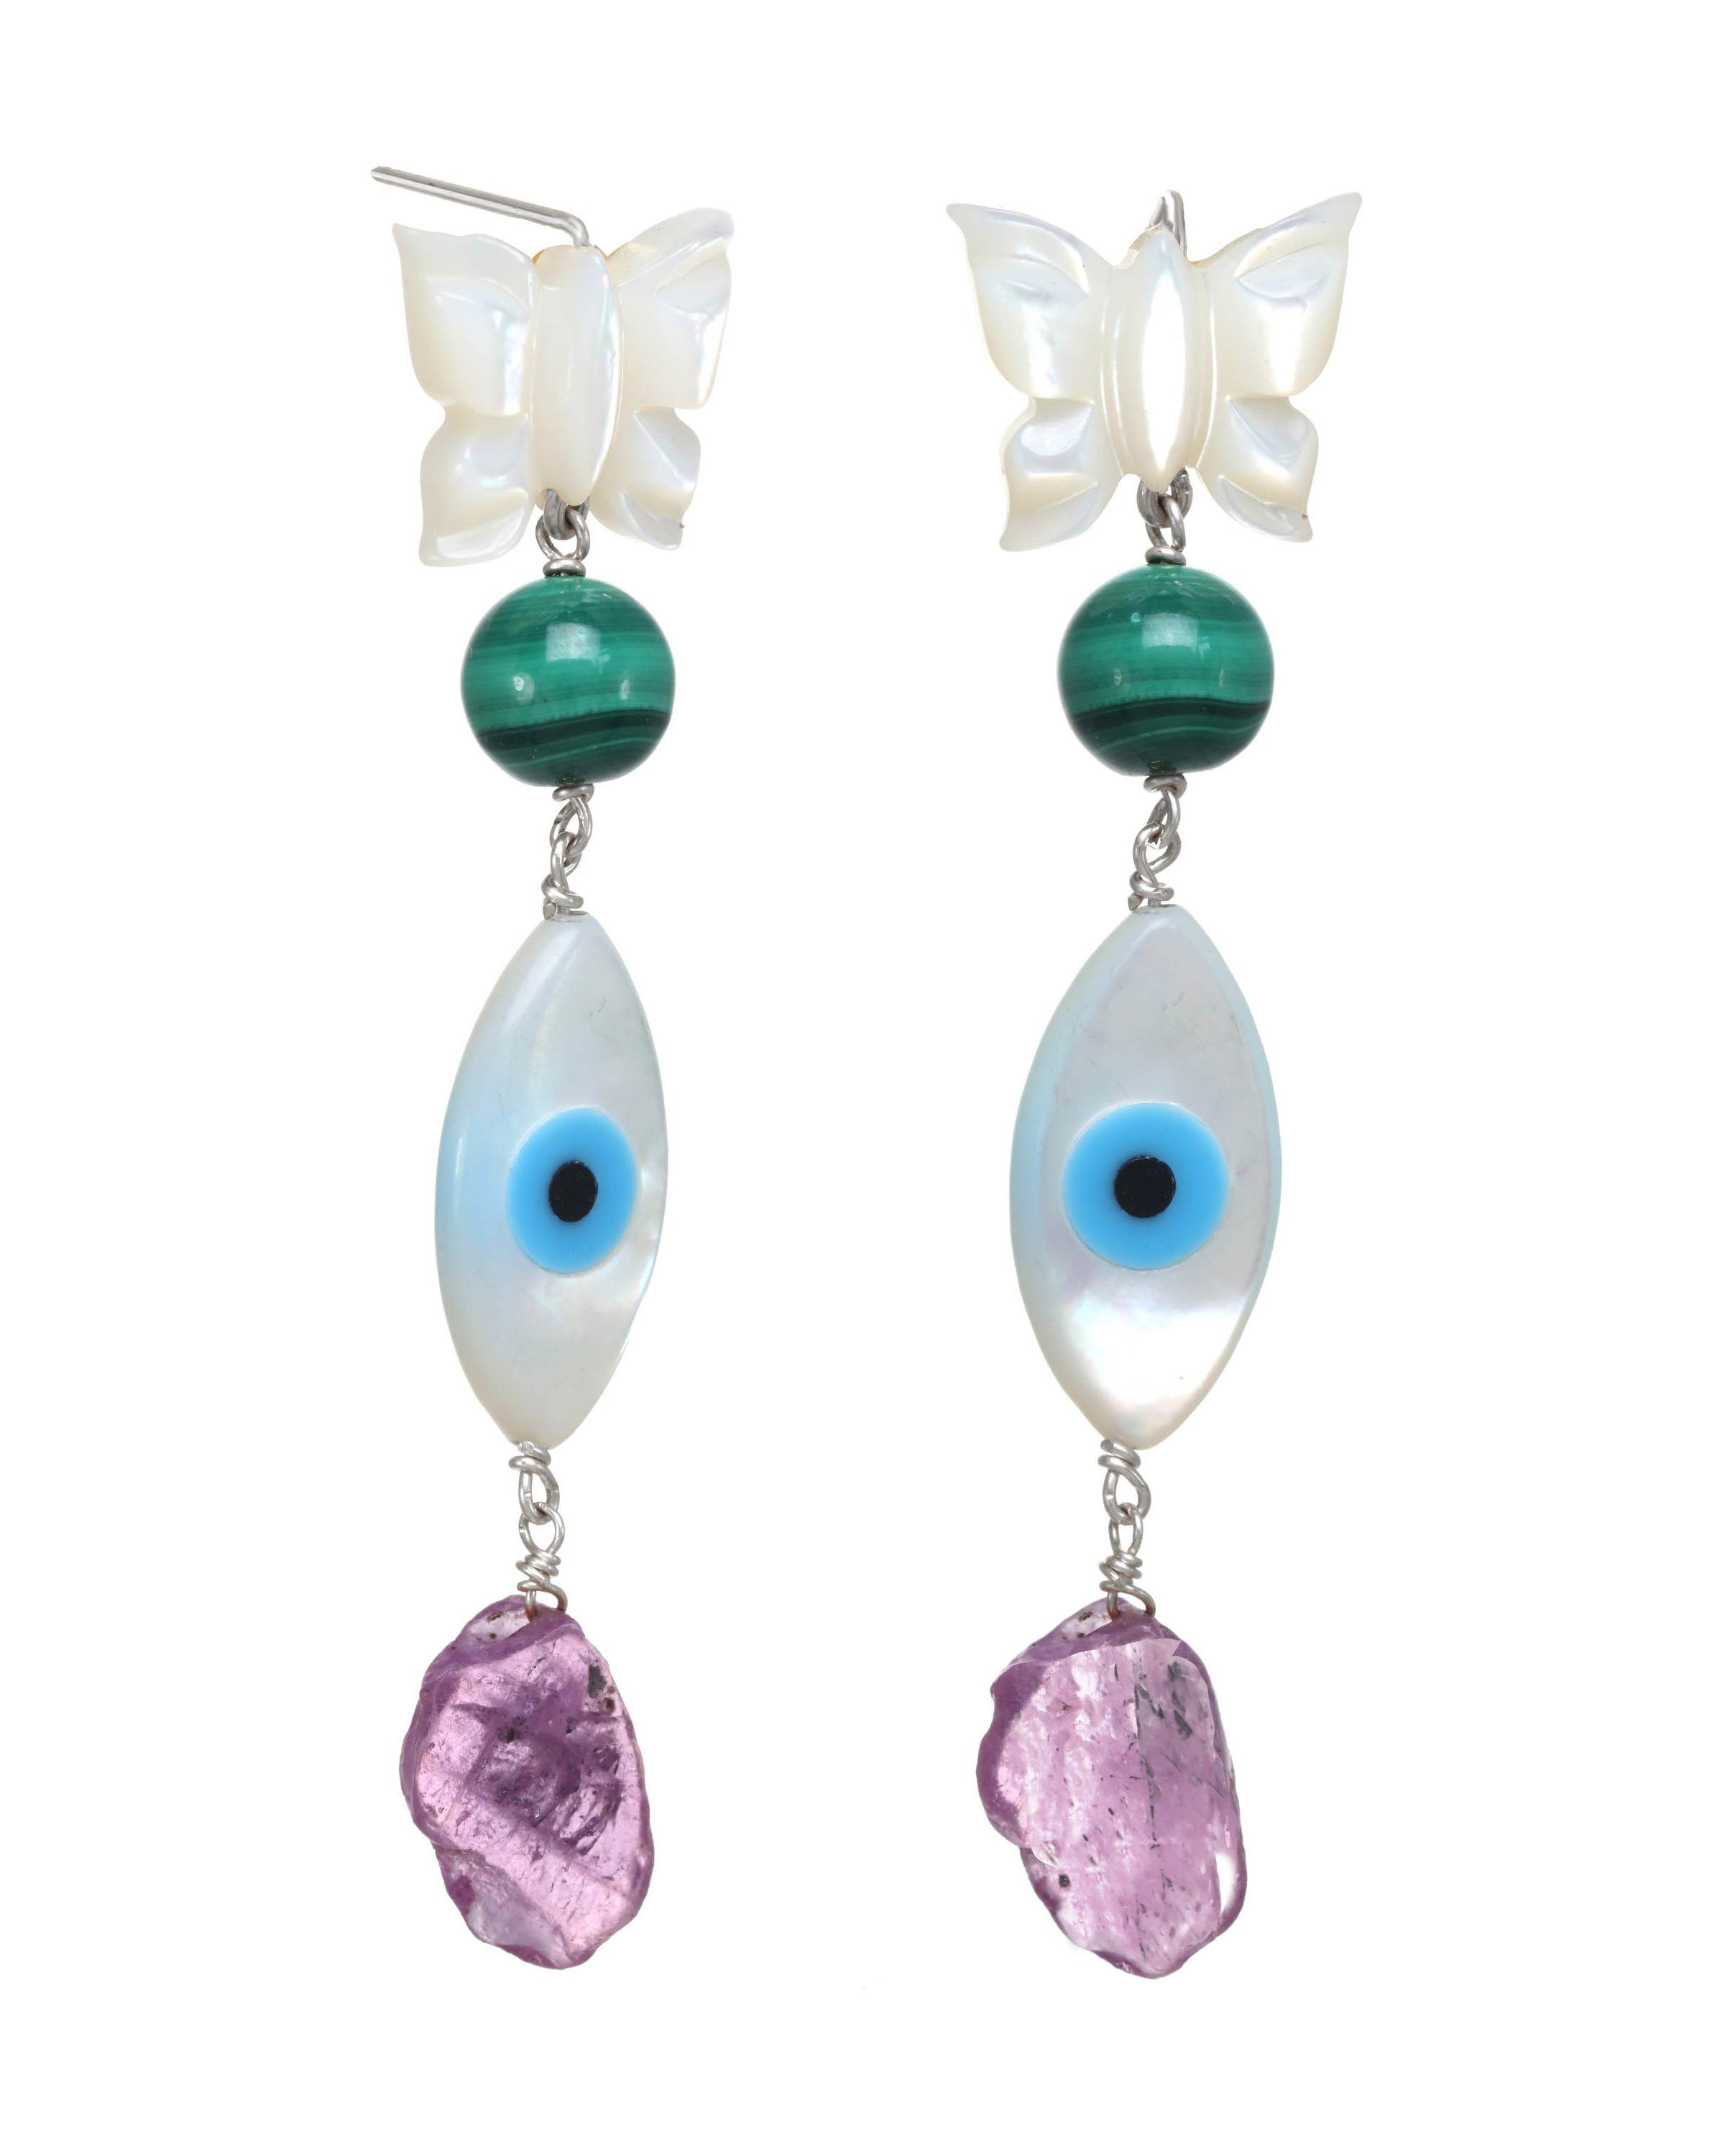 Dulce Earrings by KOZAKH. 3 inch drop dangling earrings, crafted in Sterling Silver, featuring a Mother of Pearl Butterfly charm, a round cut Malachite, a hand-carved Mother of Pearl eye charm, and a Pink Tourmaline shard.